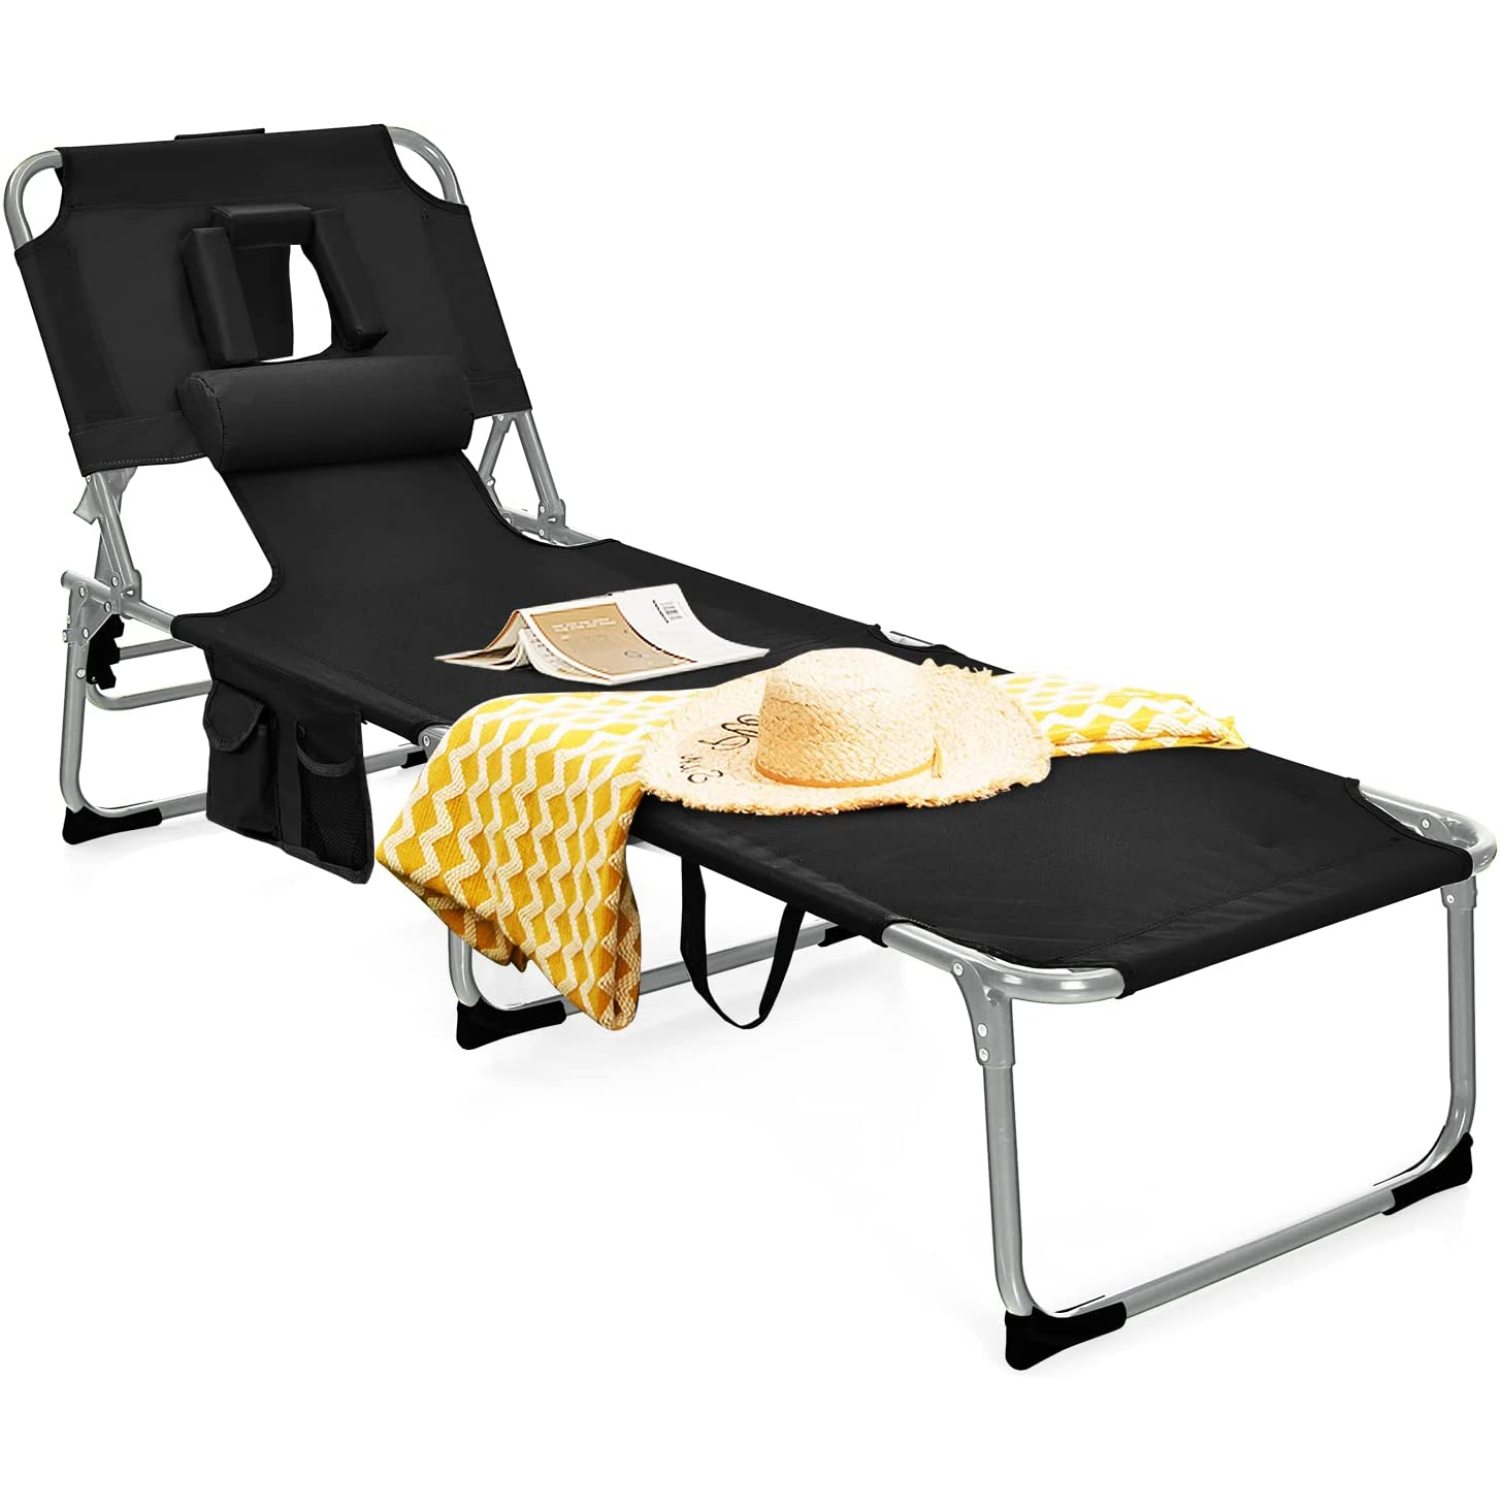 Jiaiun Beach Chaise Lounge Chair with Hole for Face, Patio Folding Adjustable Reclining Beach Sunbathing Chair with Side Pocket, Portable Face Down Tanning Chair for Outdoor Backyard Poolside (1) - image 1 of 8